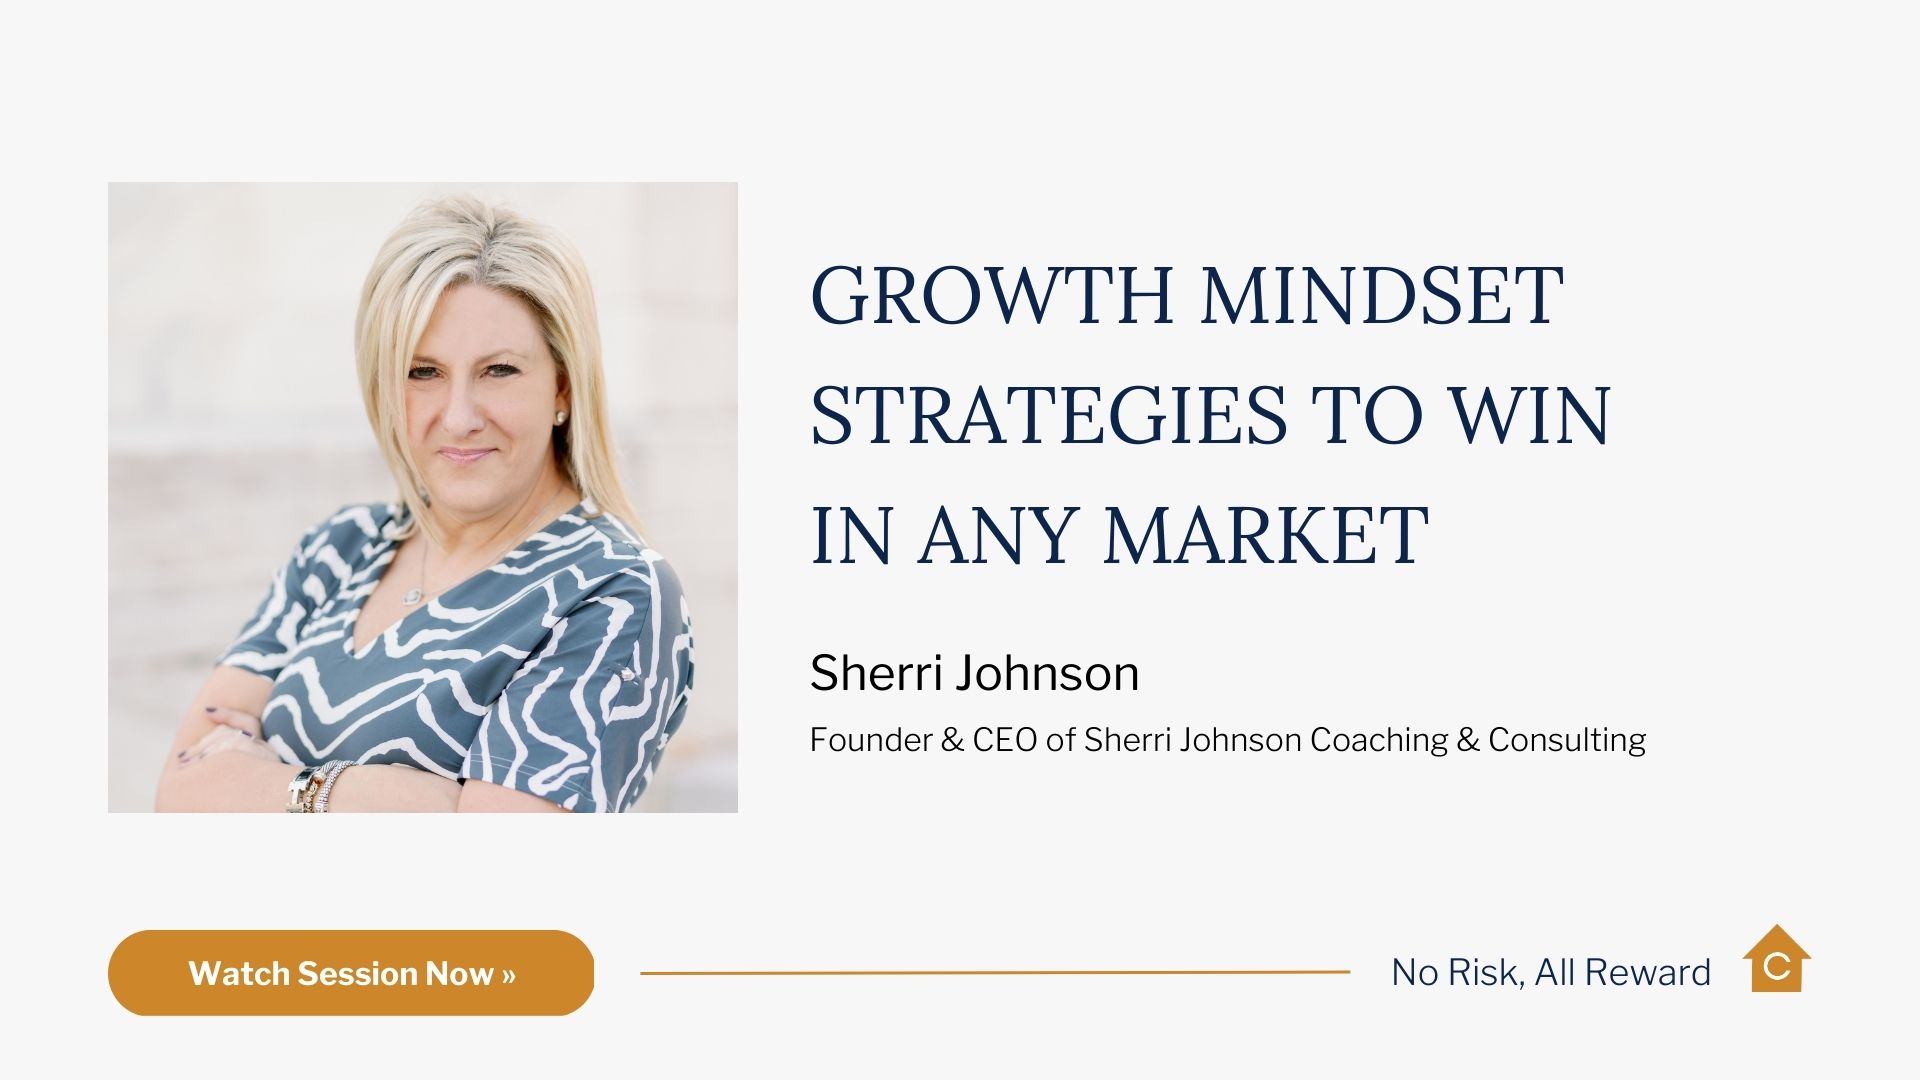 Growth Mindset Strategies to Win in Any Market